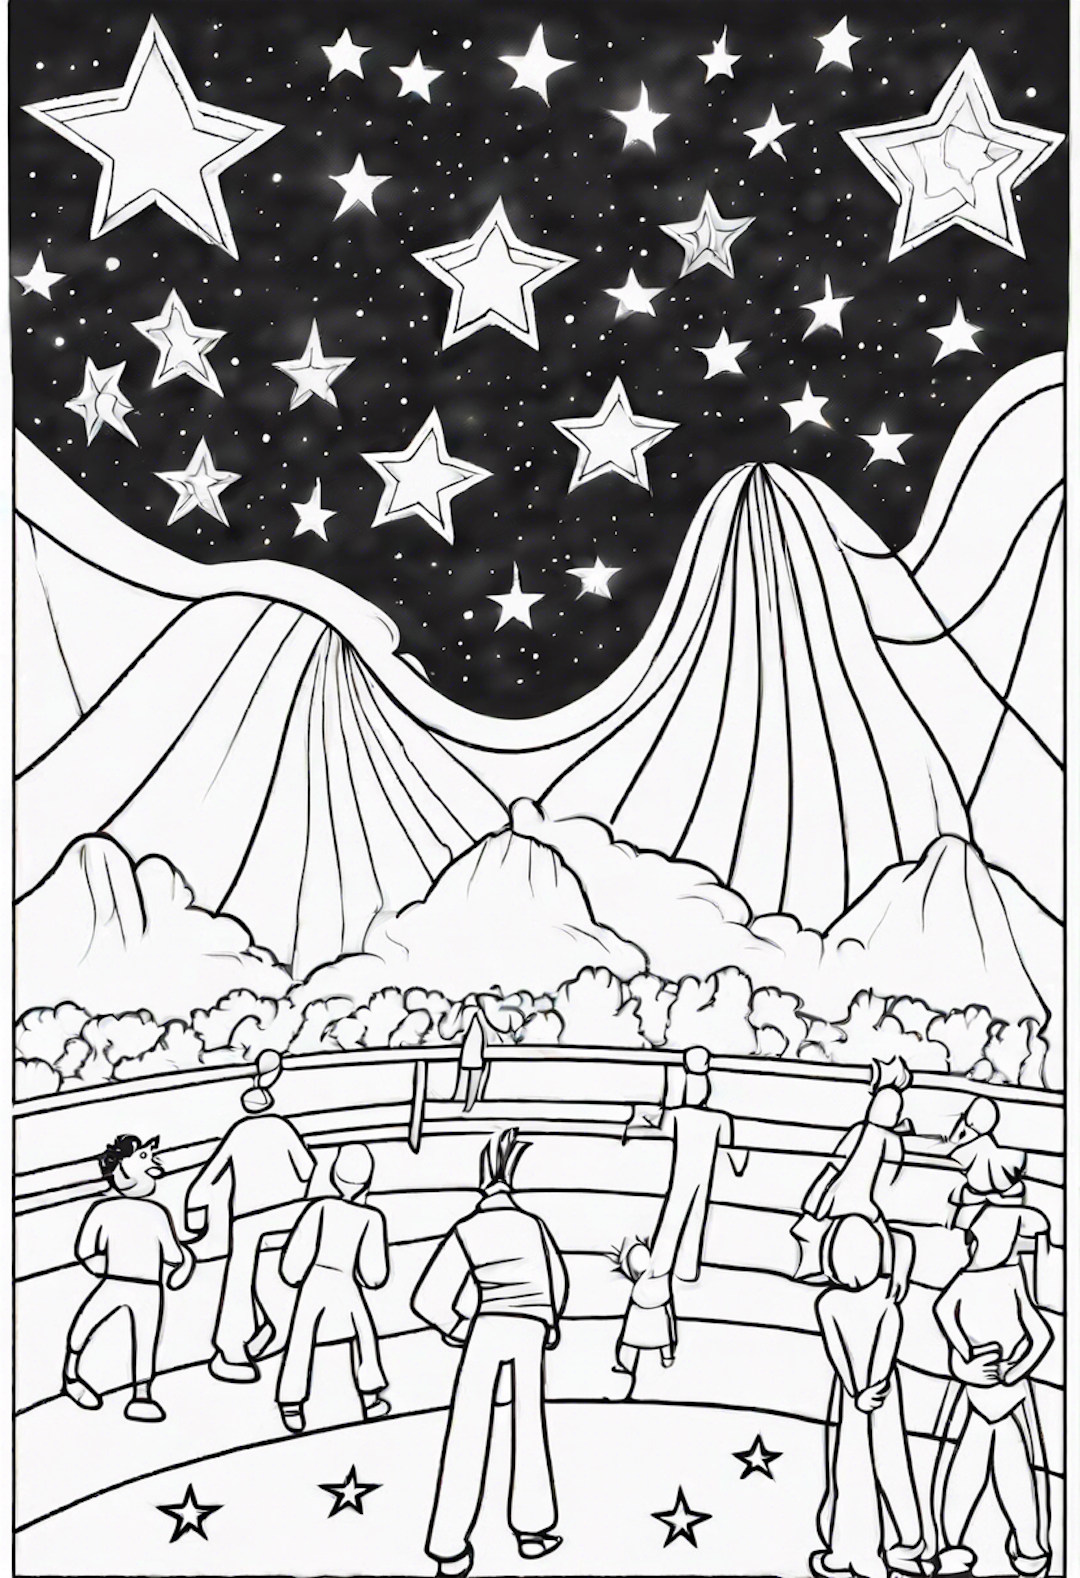 Twelve Excited Stars Watching A Star Circus